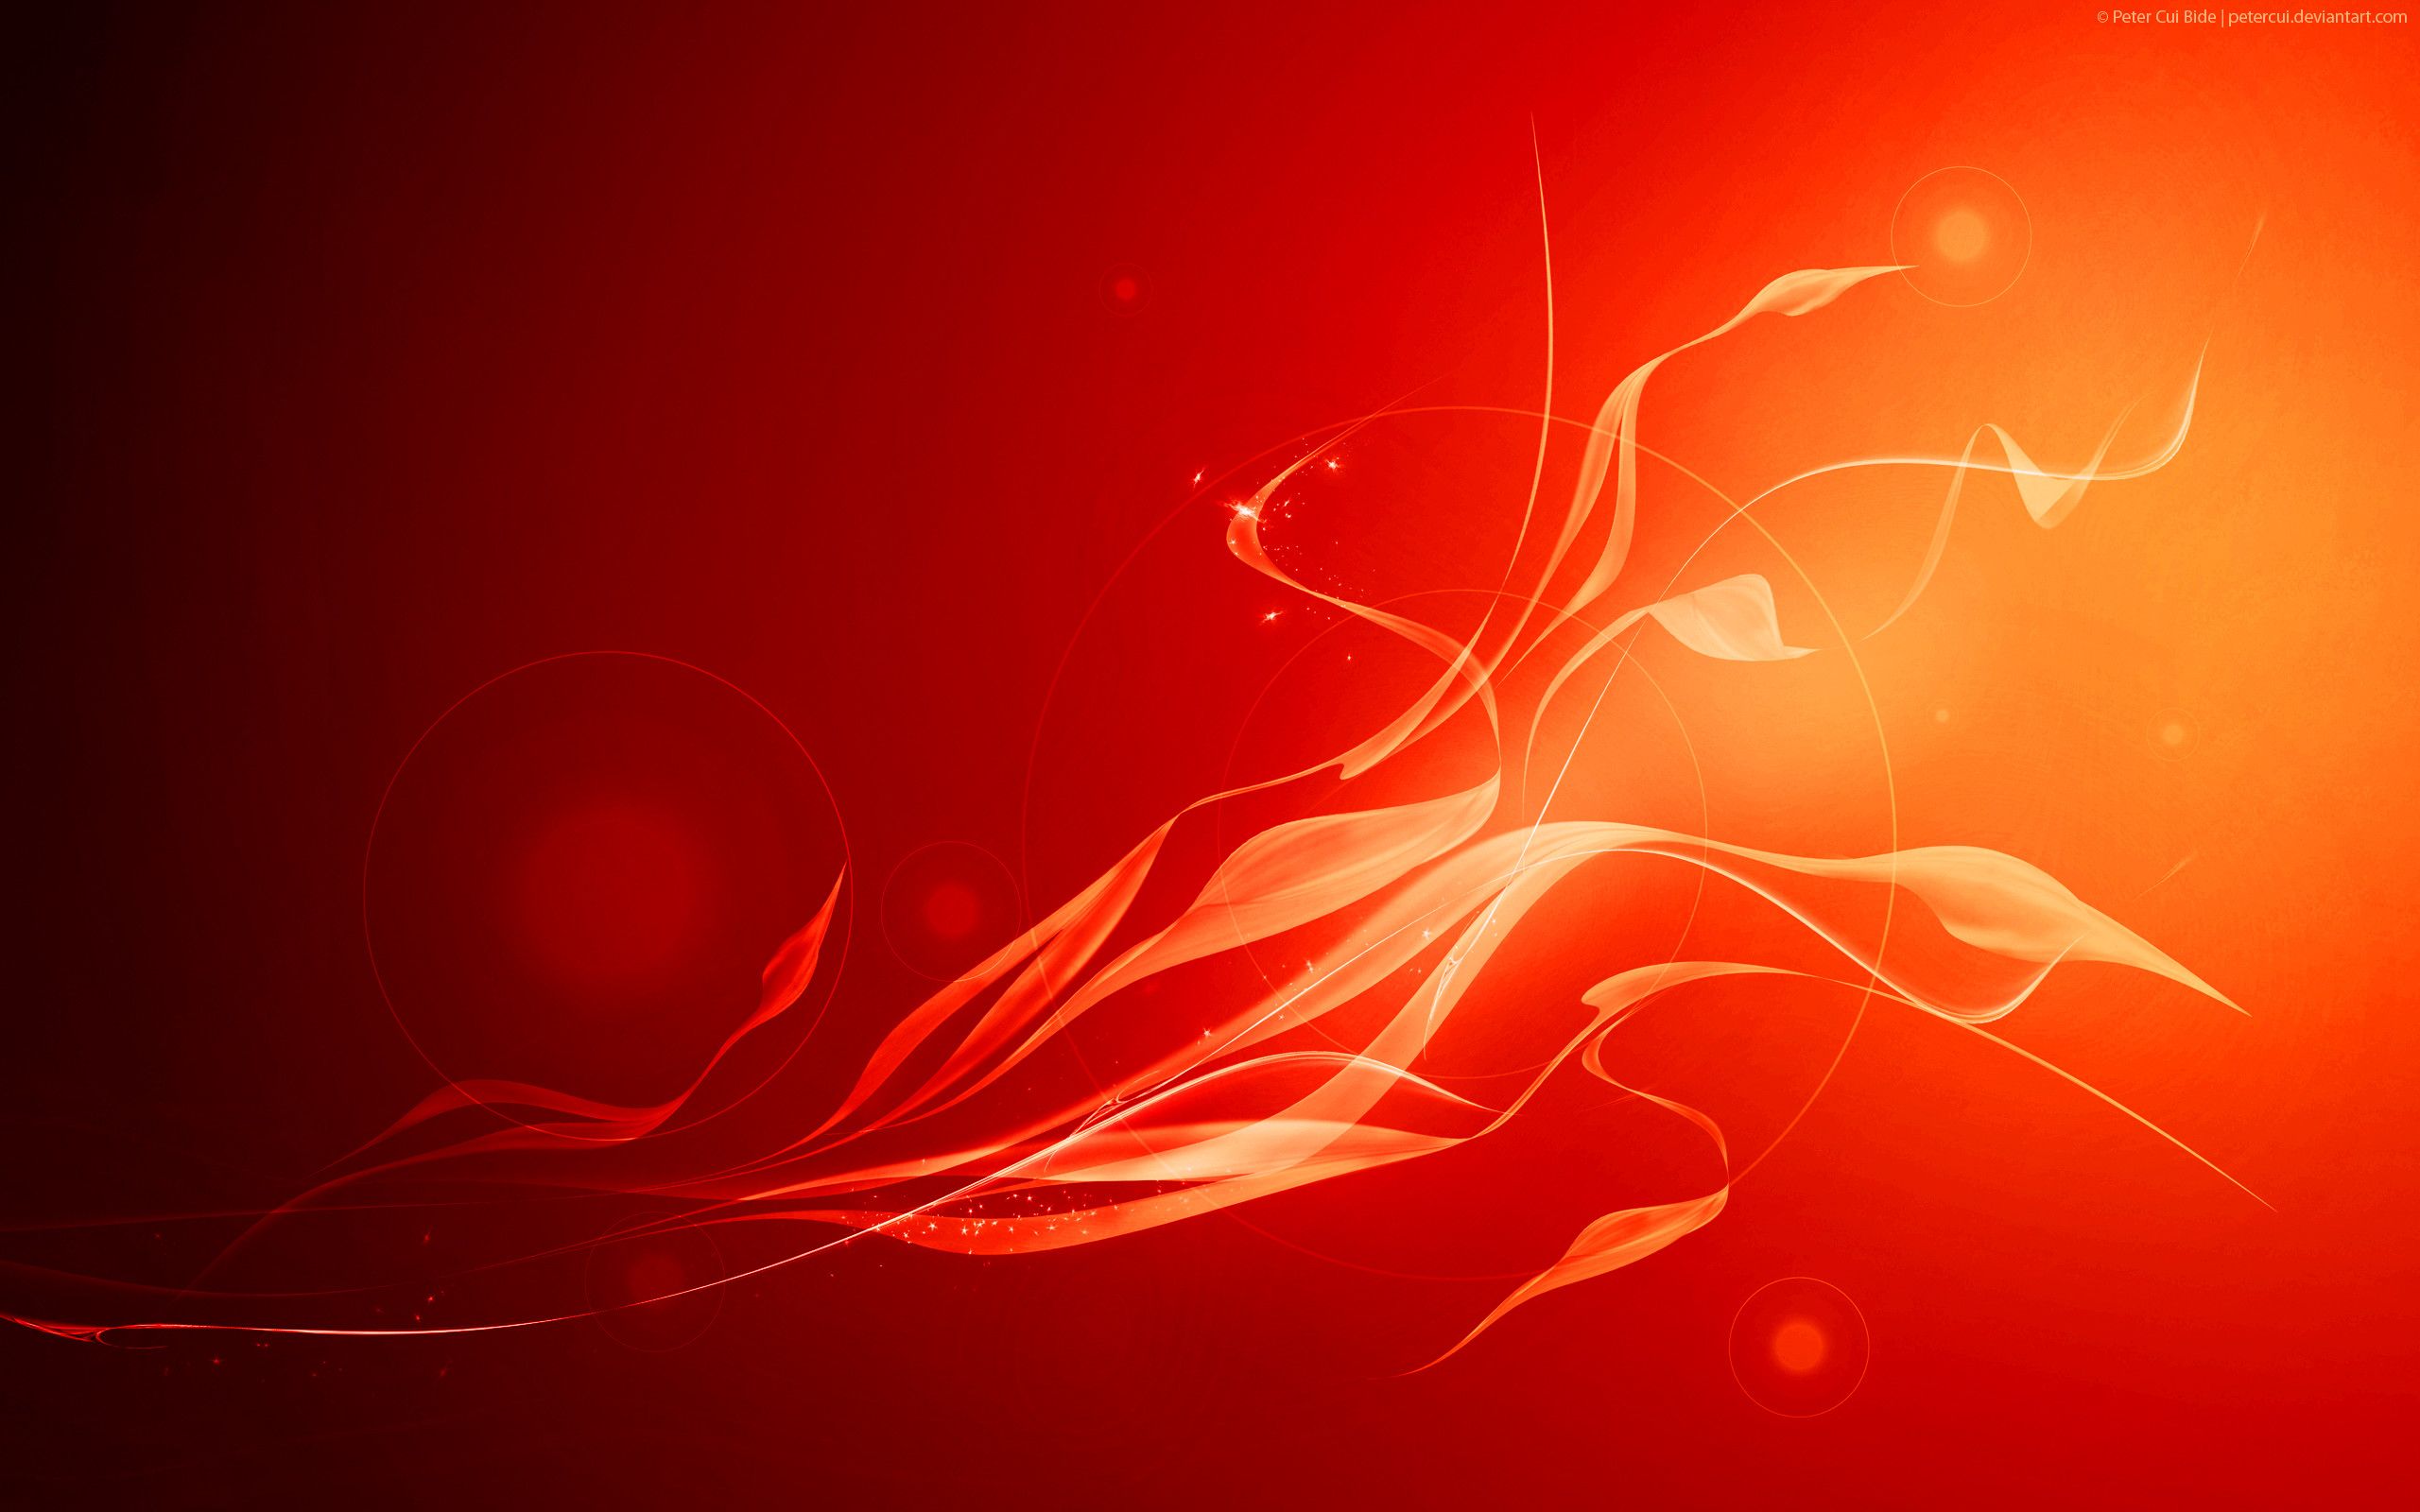 2560x1600 ... 40 Crisp Red Wallpapers For Desktop, Laptop and Tablet Devices ...